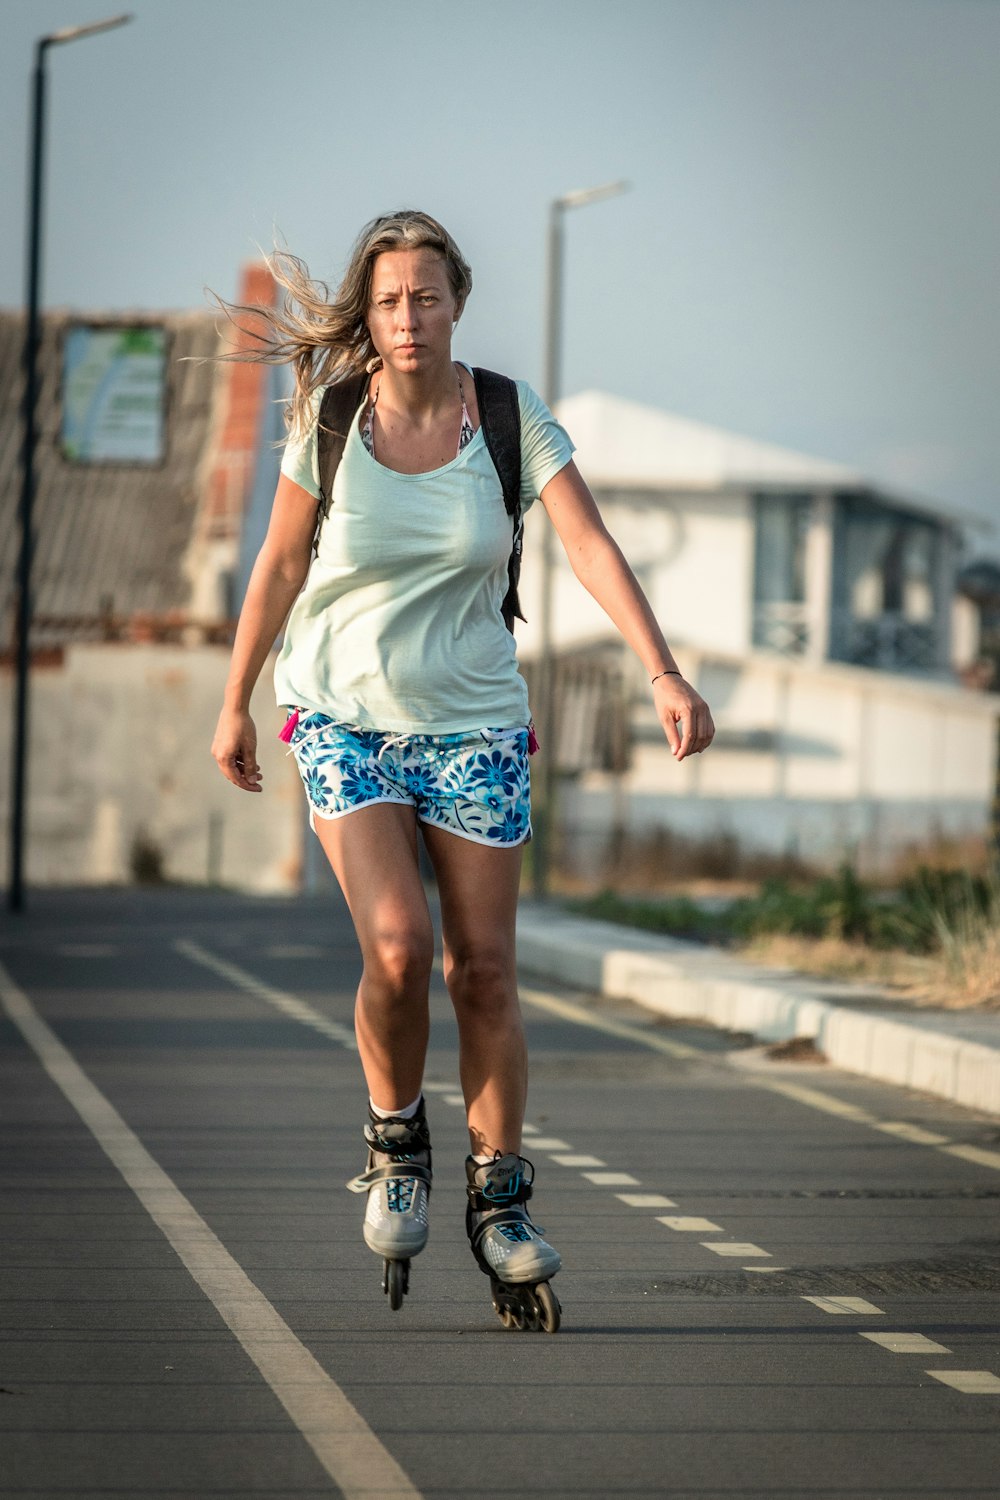 woman in roller blades on road during daytime